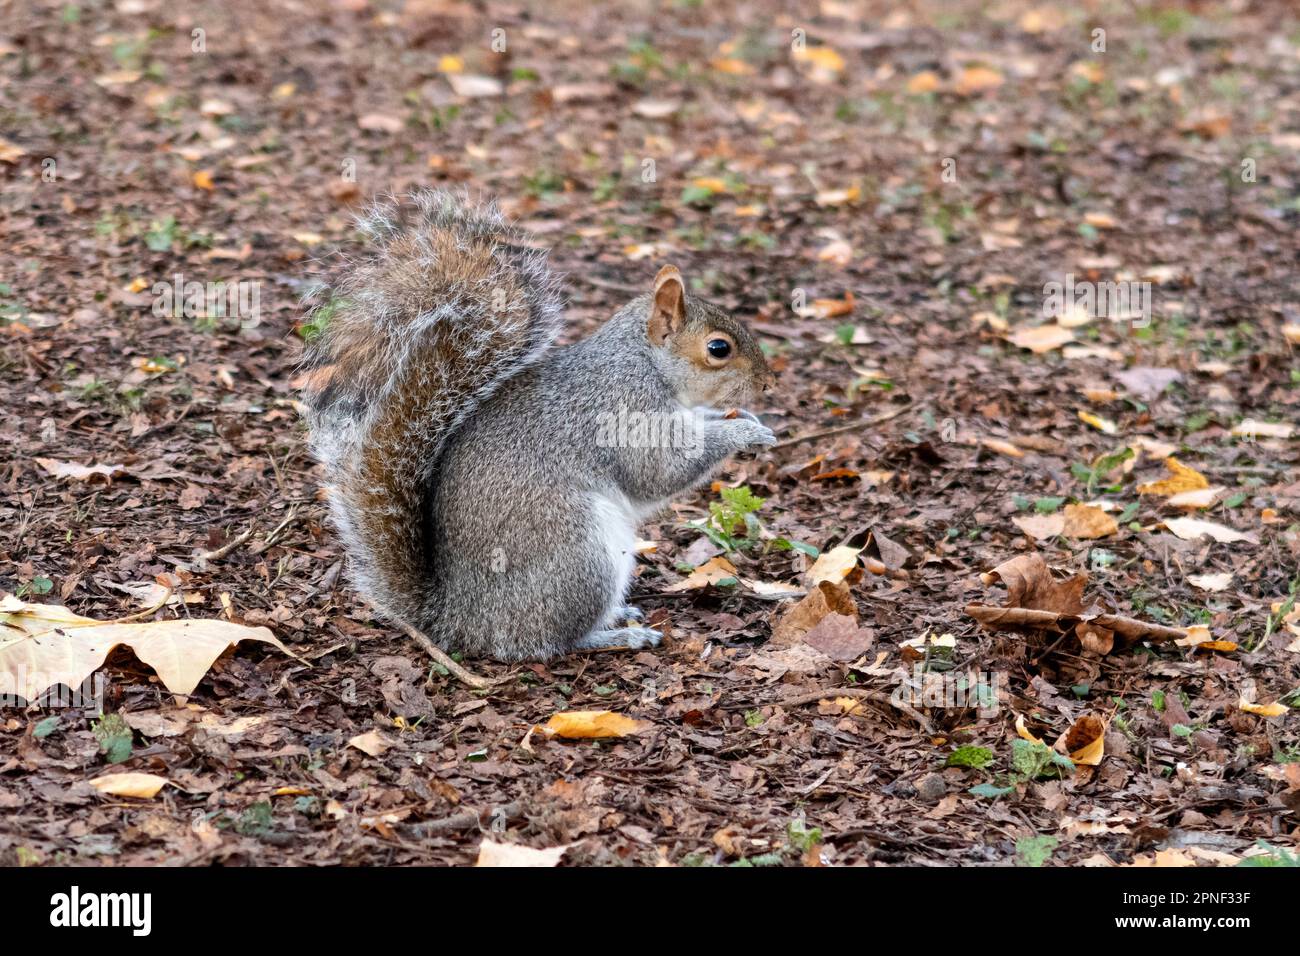 Eastern gray squirrel, Grey squirrel (Sciurus carolinensis), sits on the ground and nibbling a nut, side view, United Kingdom, England, London Stock Photo